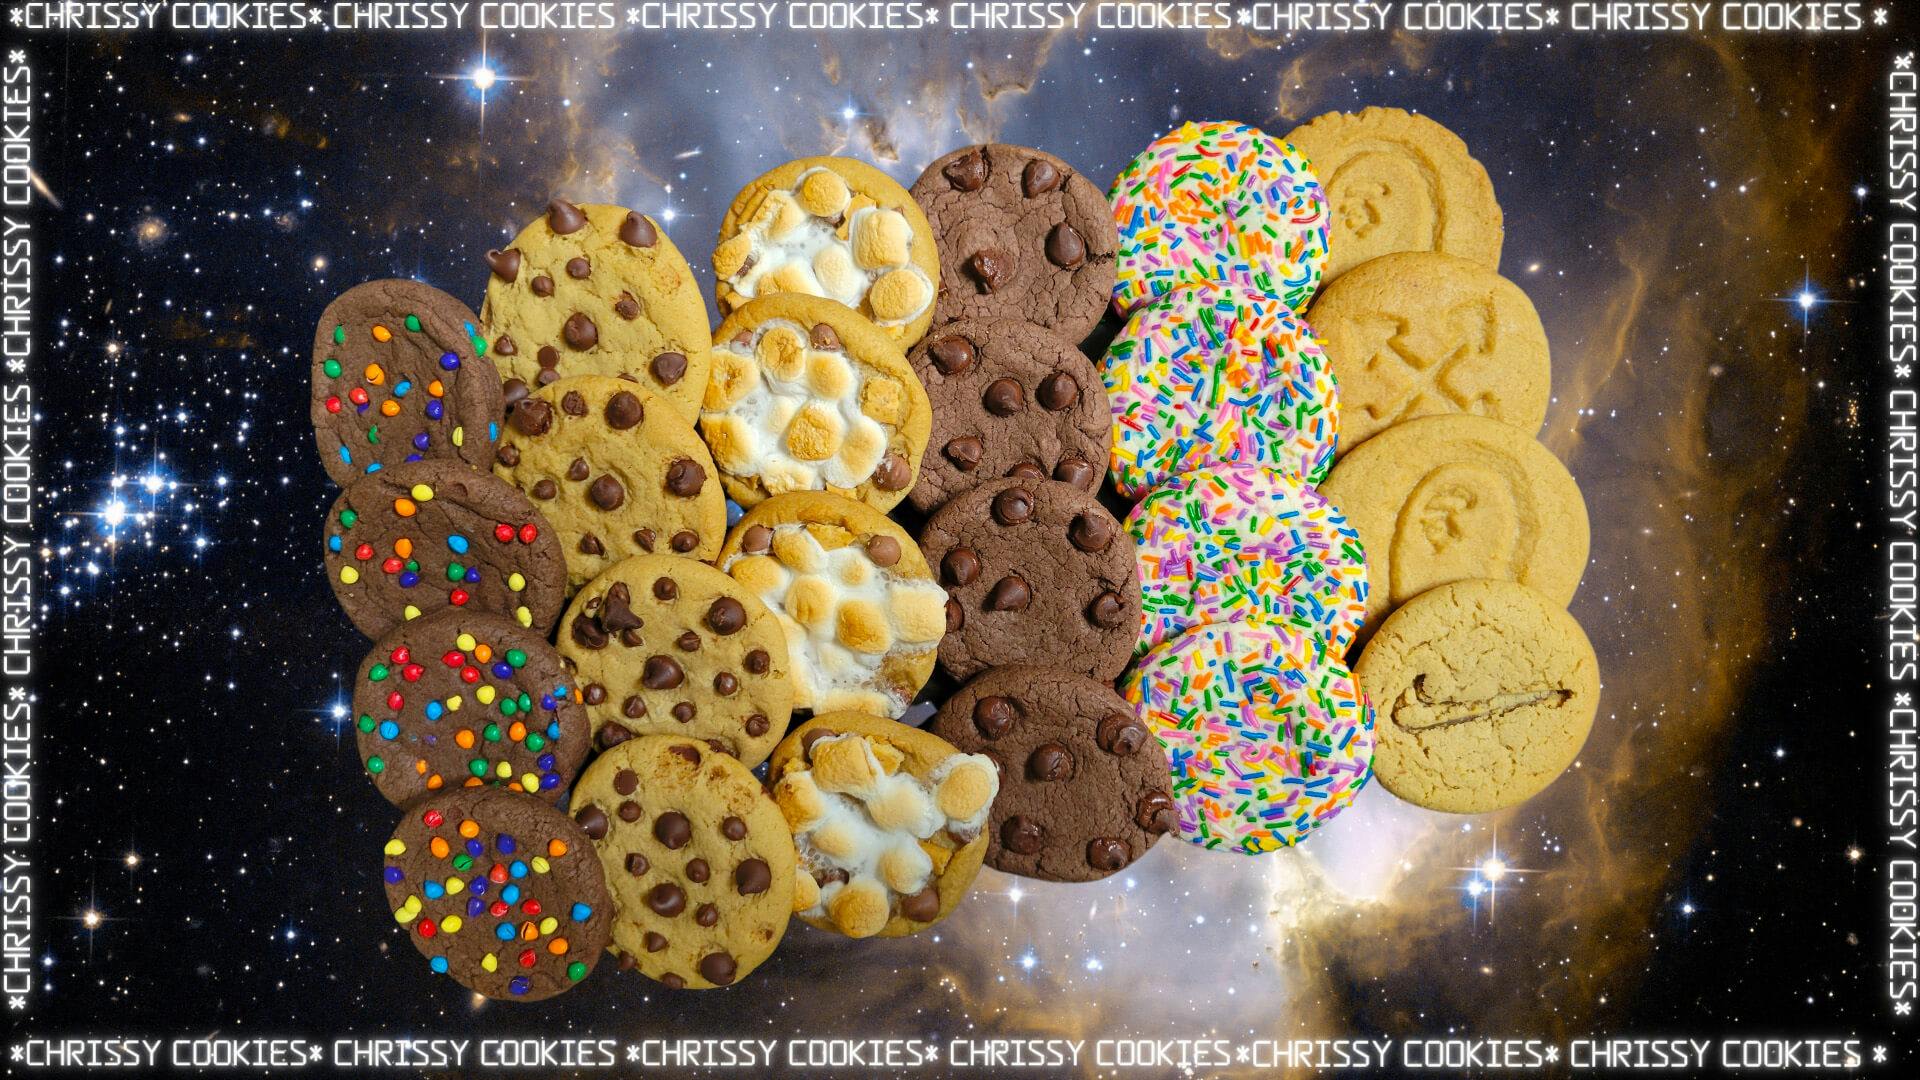 Chrissy Cookies cover image